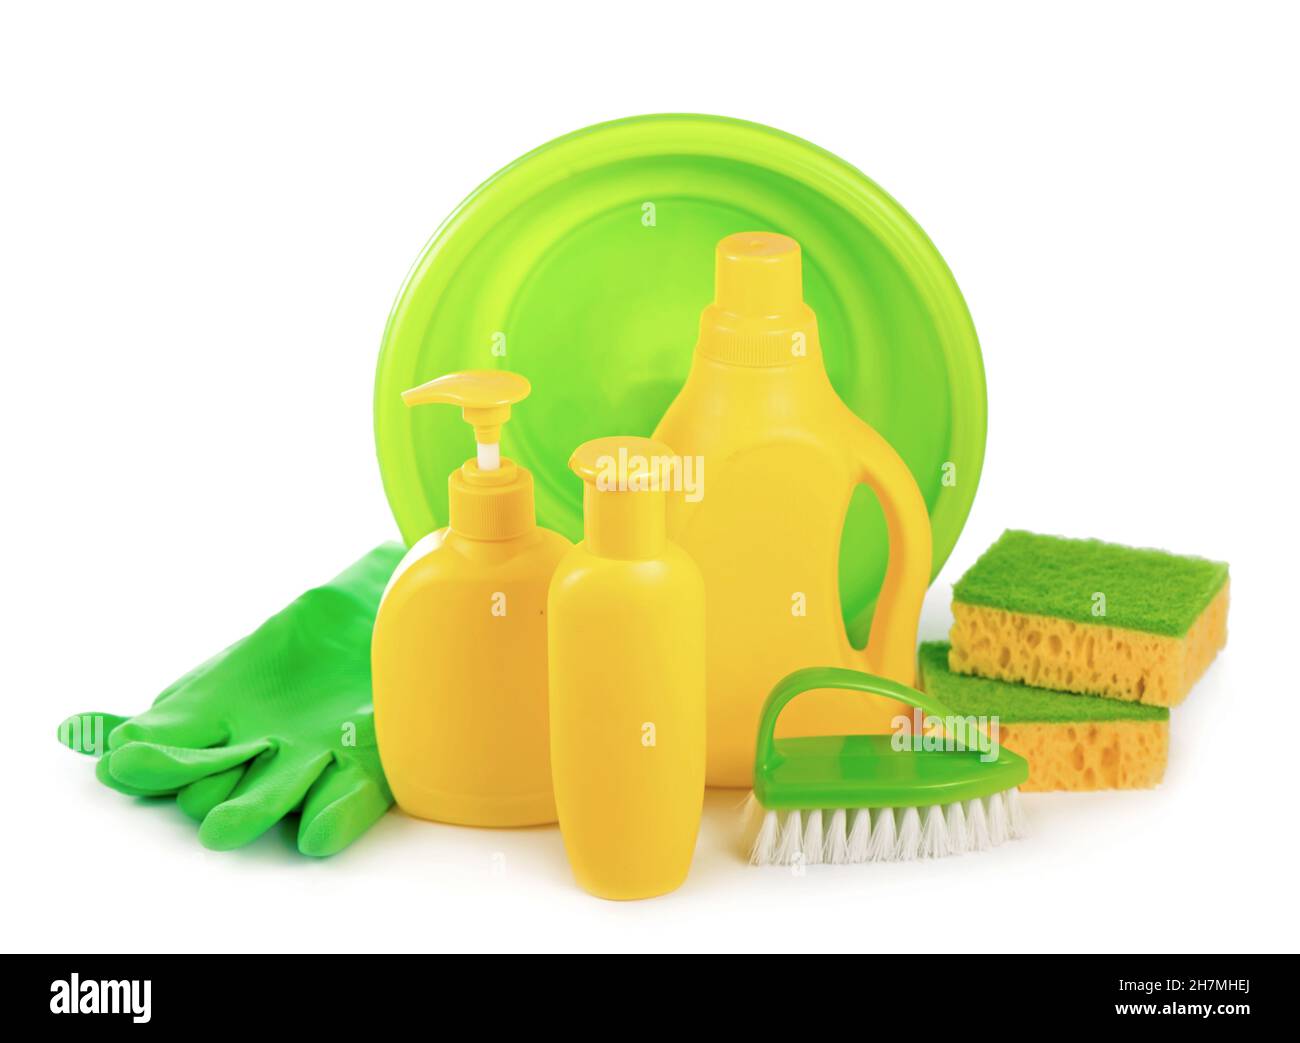 https://c8.alamy.com/comp/2H7MHEJ/household-cleaning-products-and-accessories-in-basket-with-detergent-spay-and-rubber-gloves-2H7MHEJ.jpg